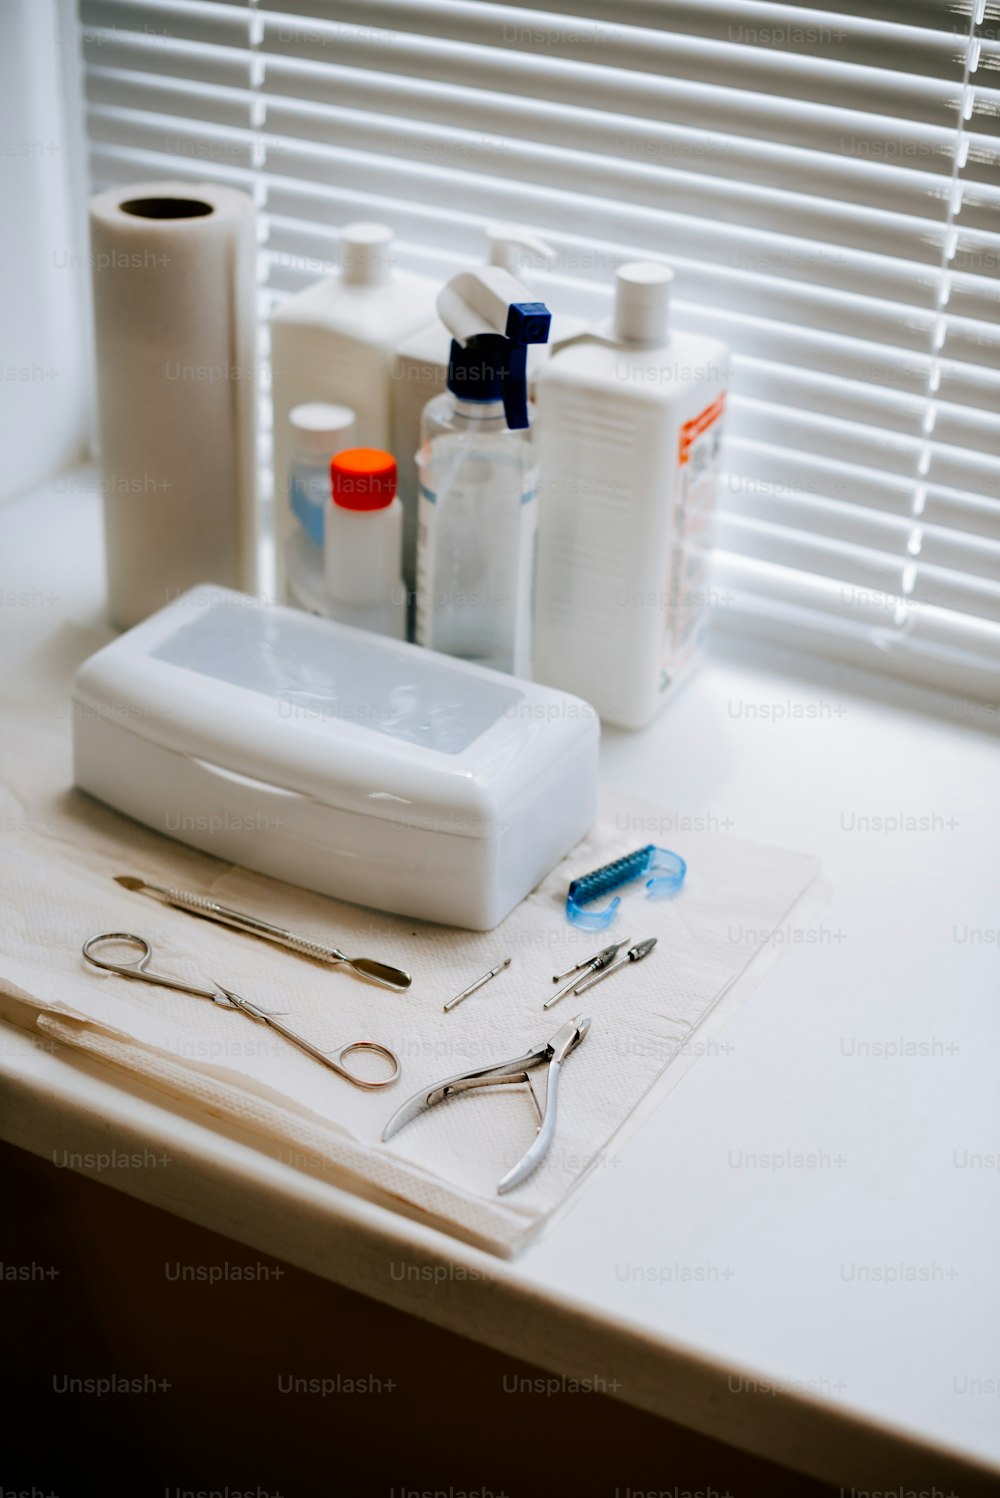 a pair of scissors, scissors, and other medical supplies on a counter